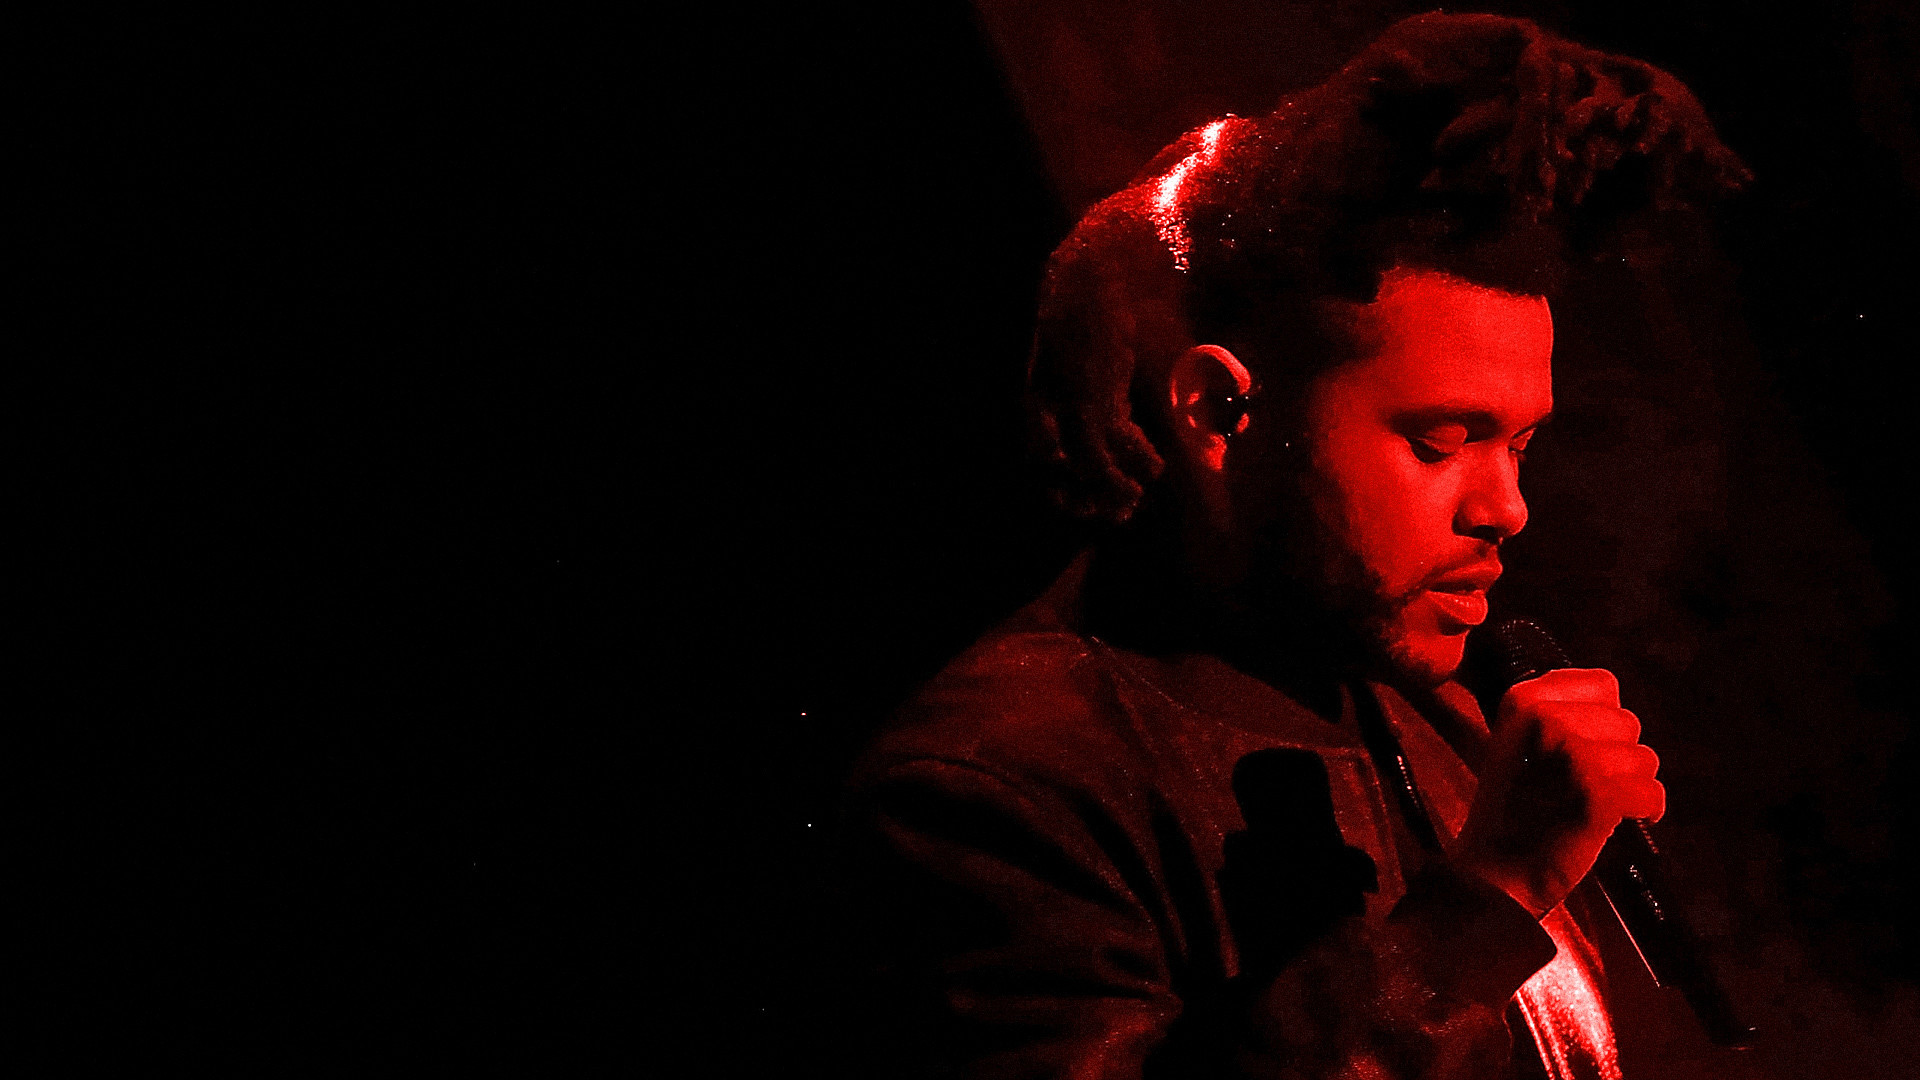 1920x1080 The Weeknd HD Wallpapers whb 8 #TheWeekndHDWallpapers #TheWeeknd  #celebrities #actor #singer